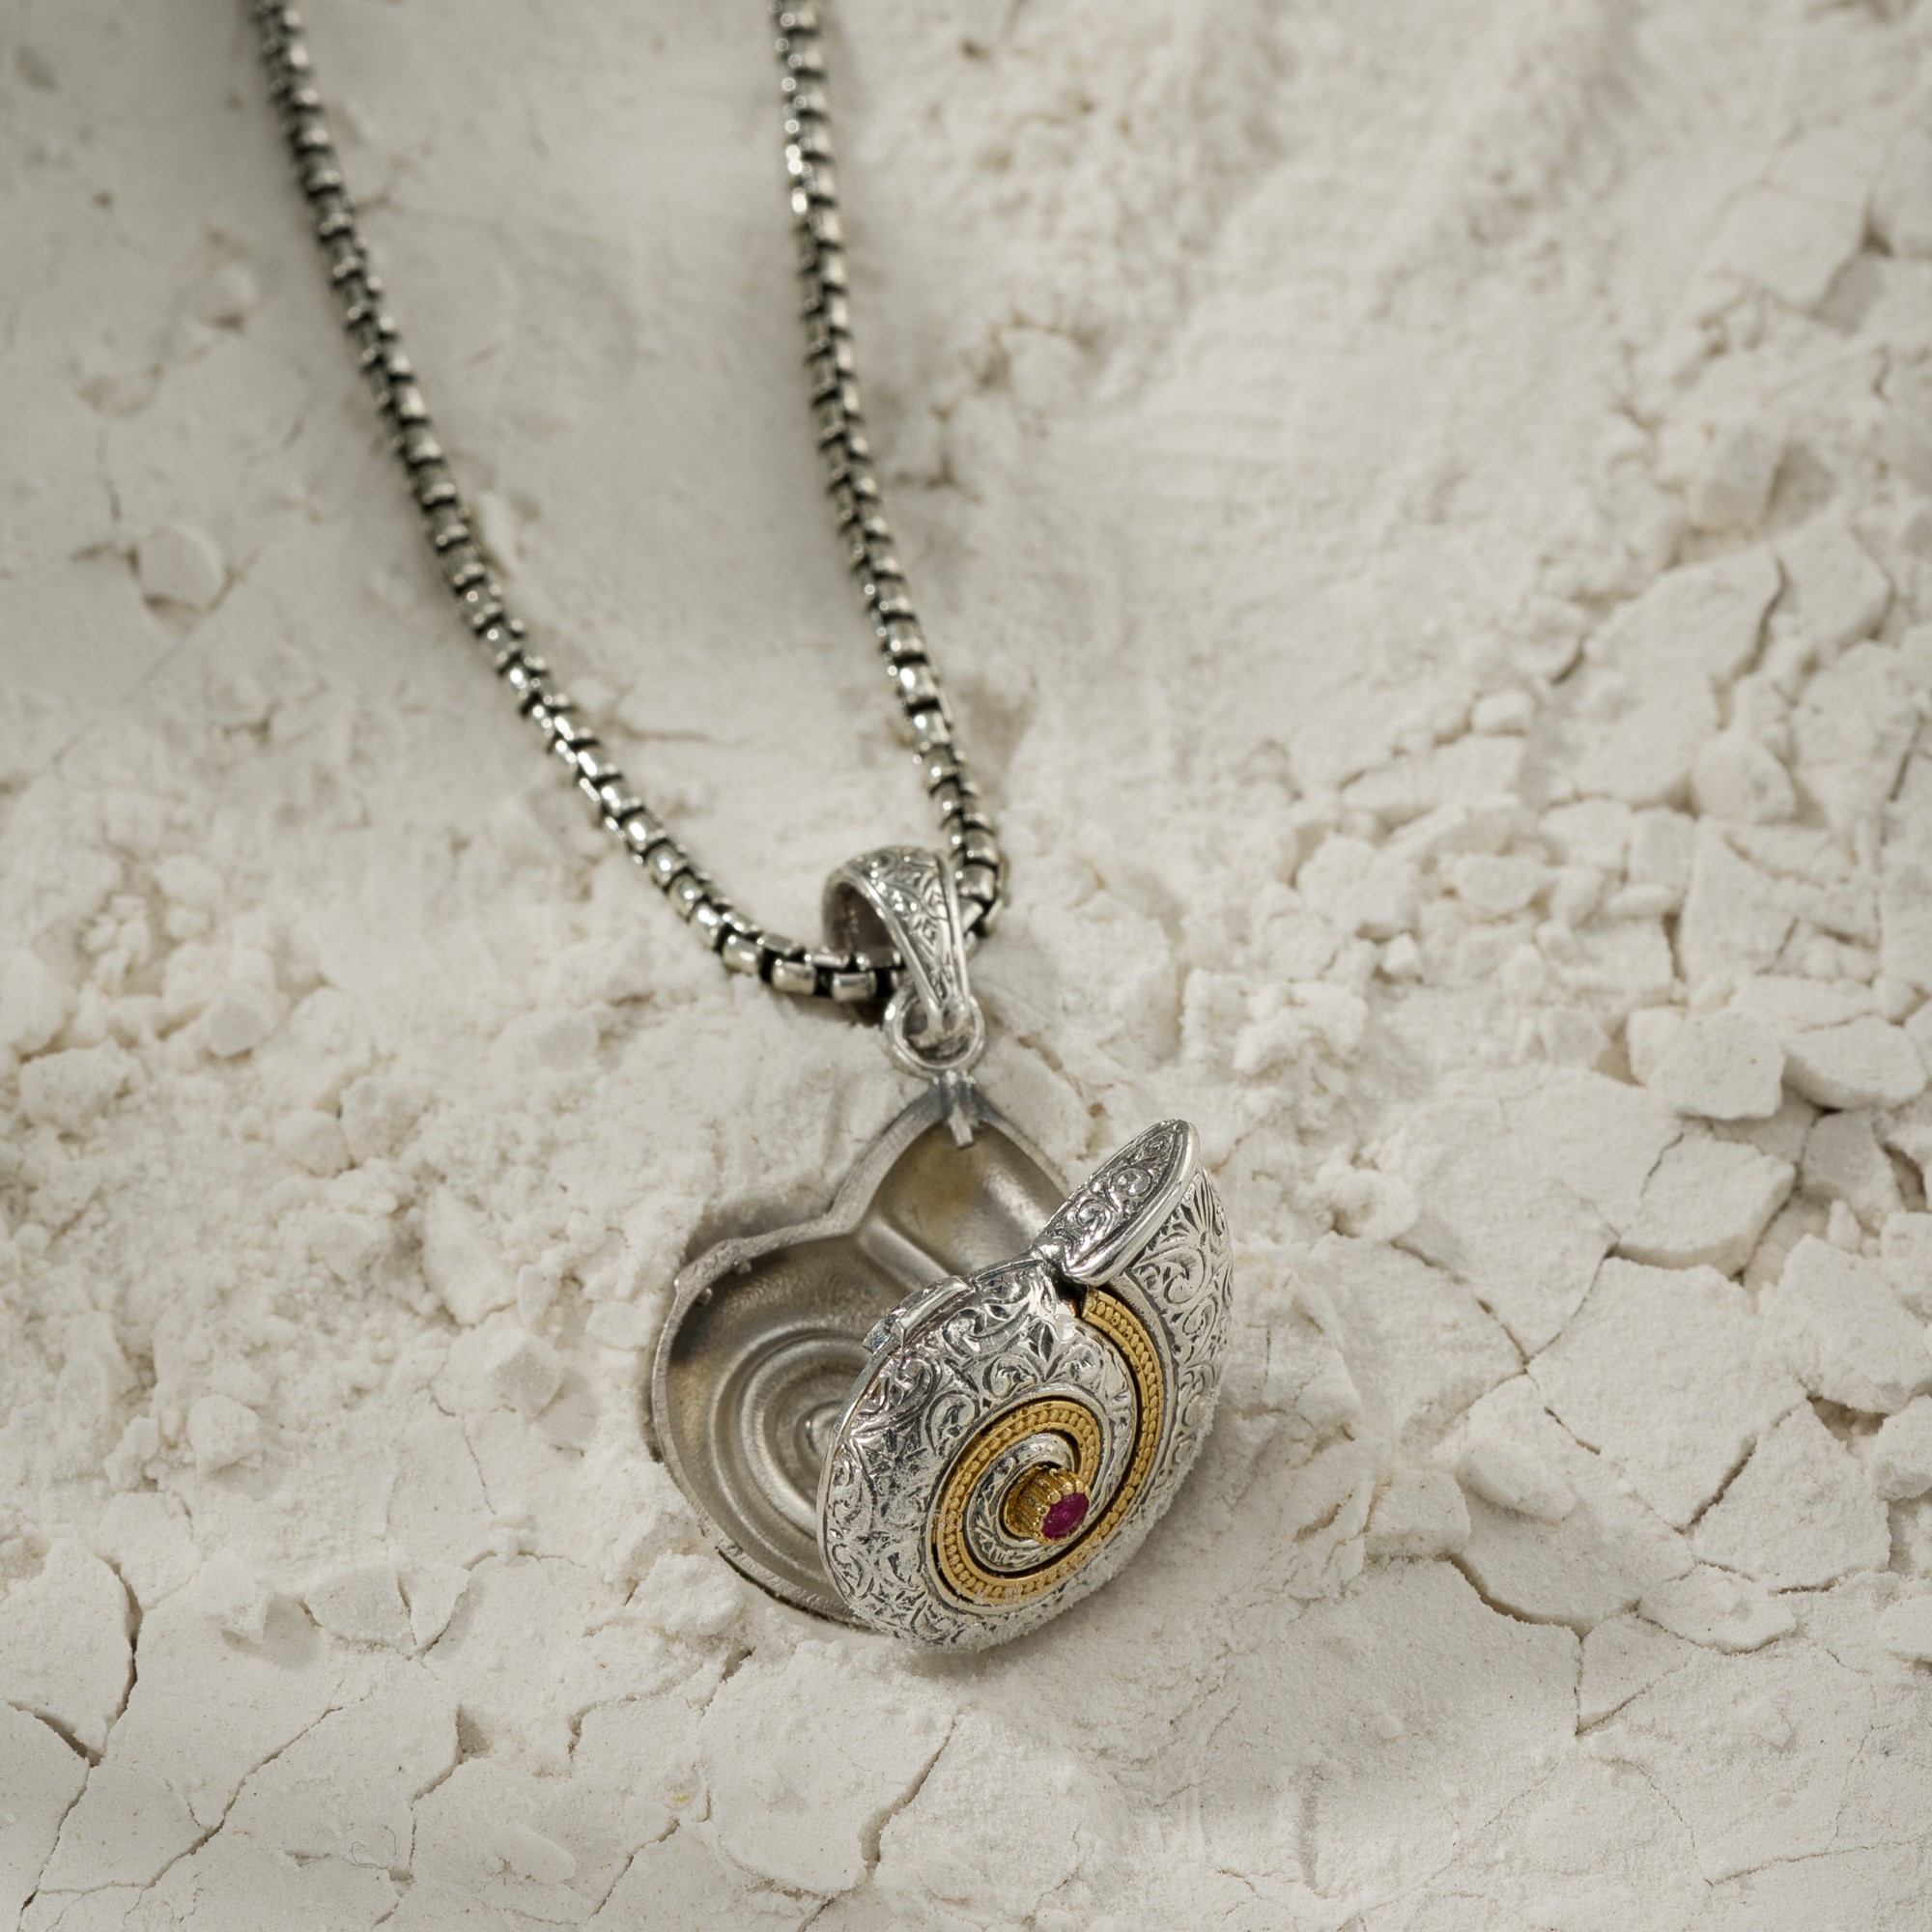 Sea Snail Locket Pendant in 18K Gold and Sterling Silver with Ruby